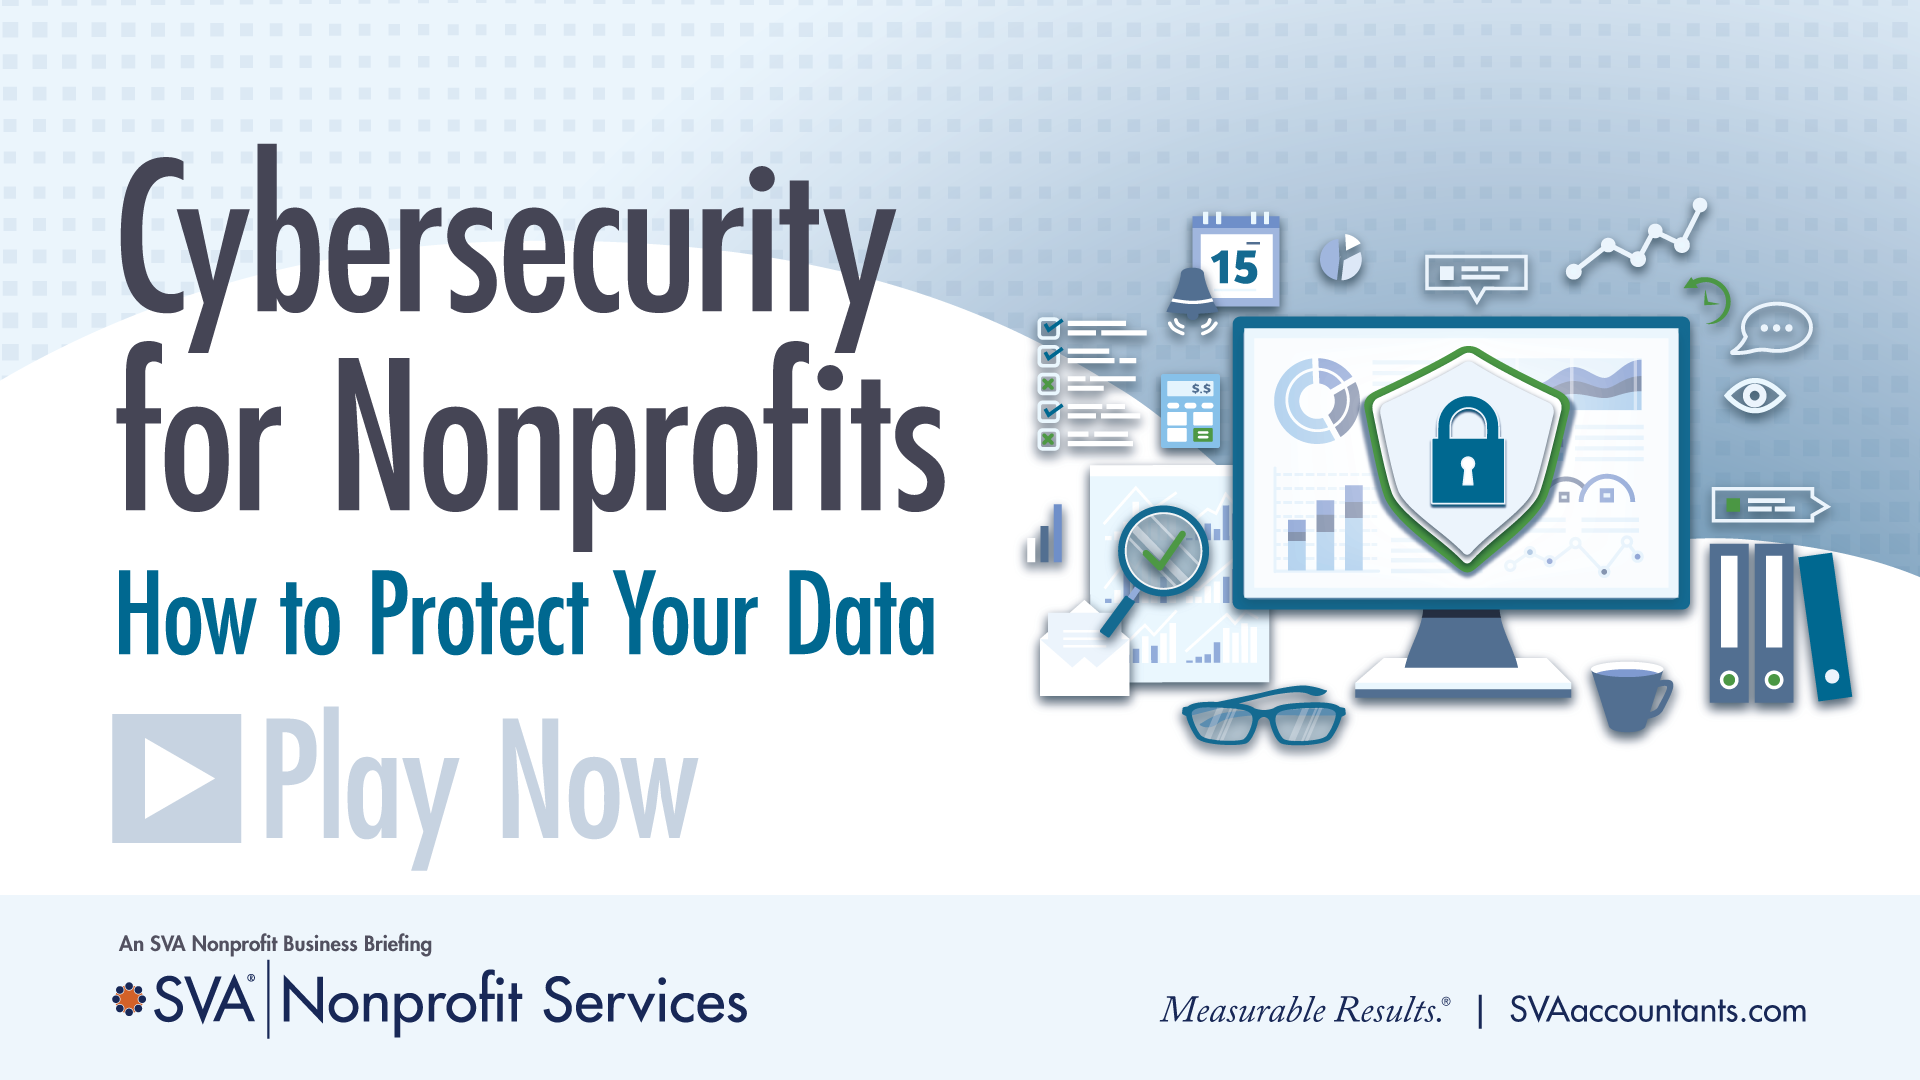 Cybersecurity for Nonprofits: How to Protect Your Data